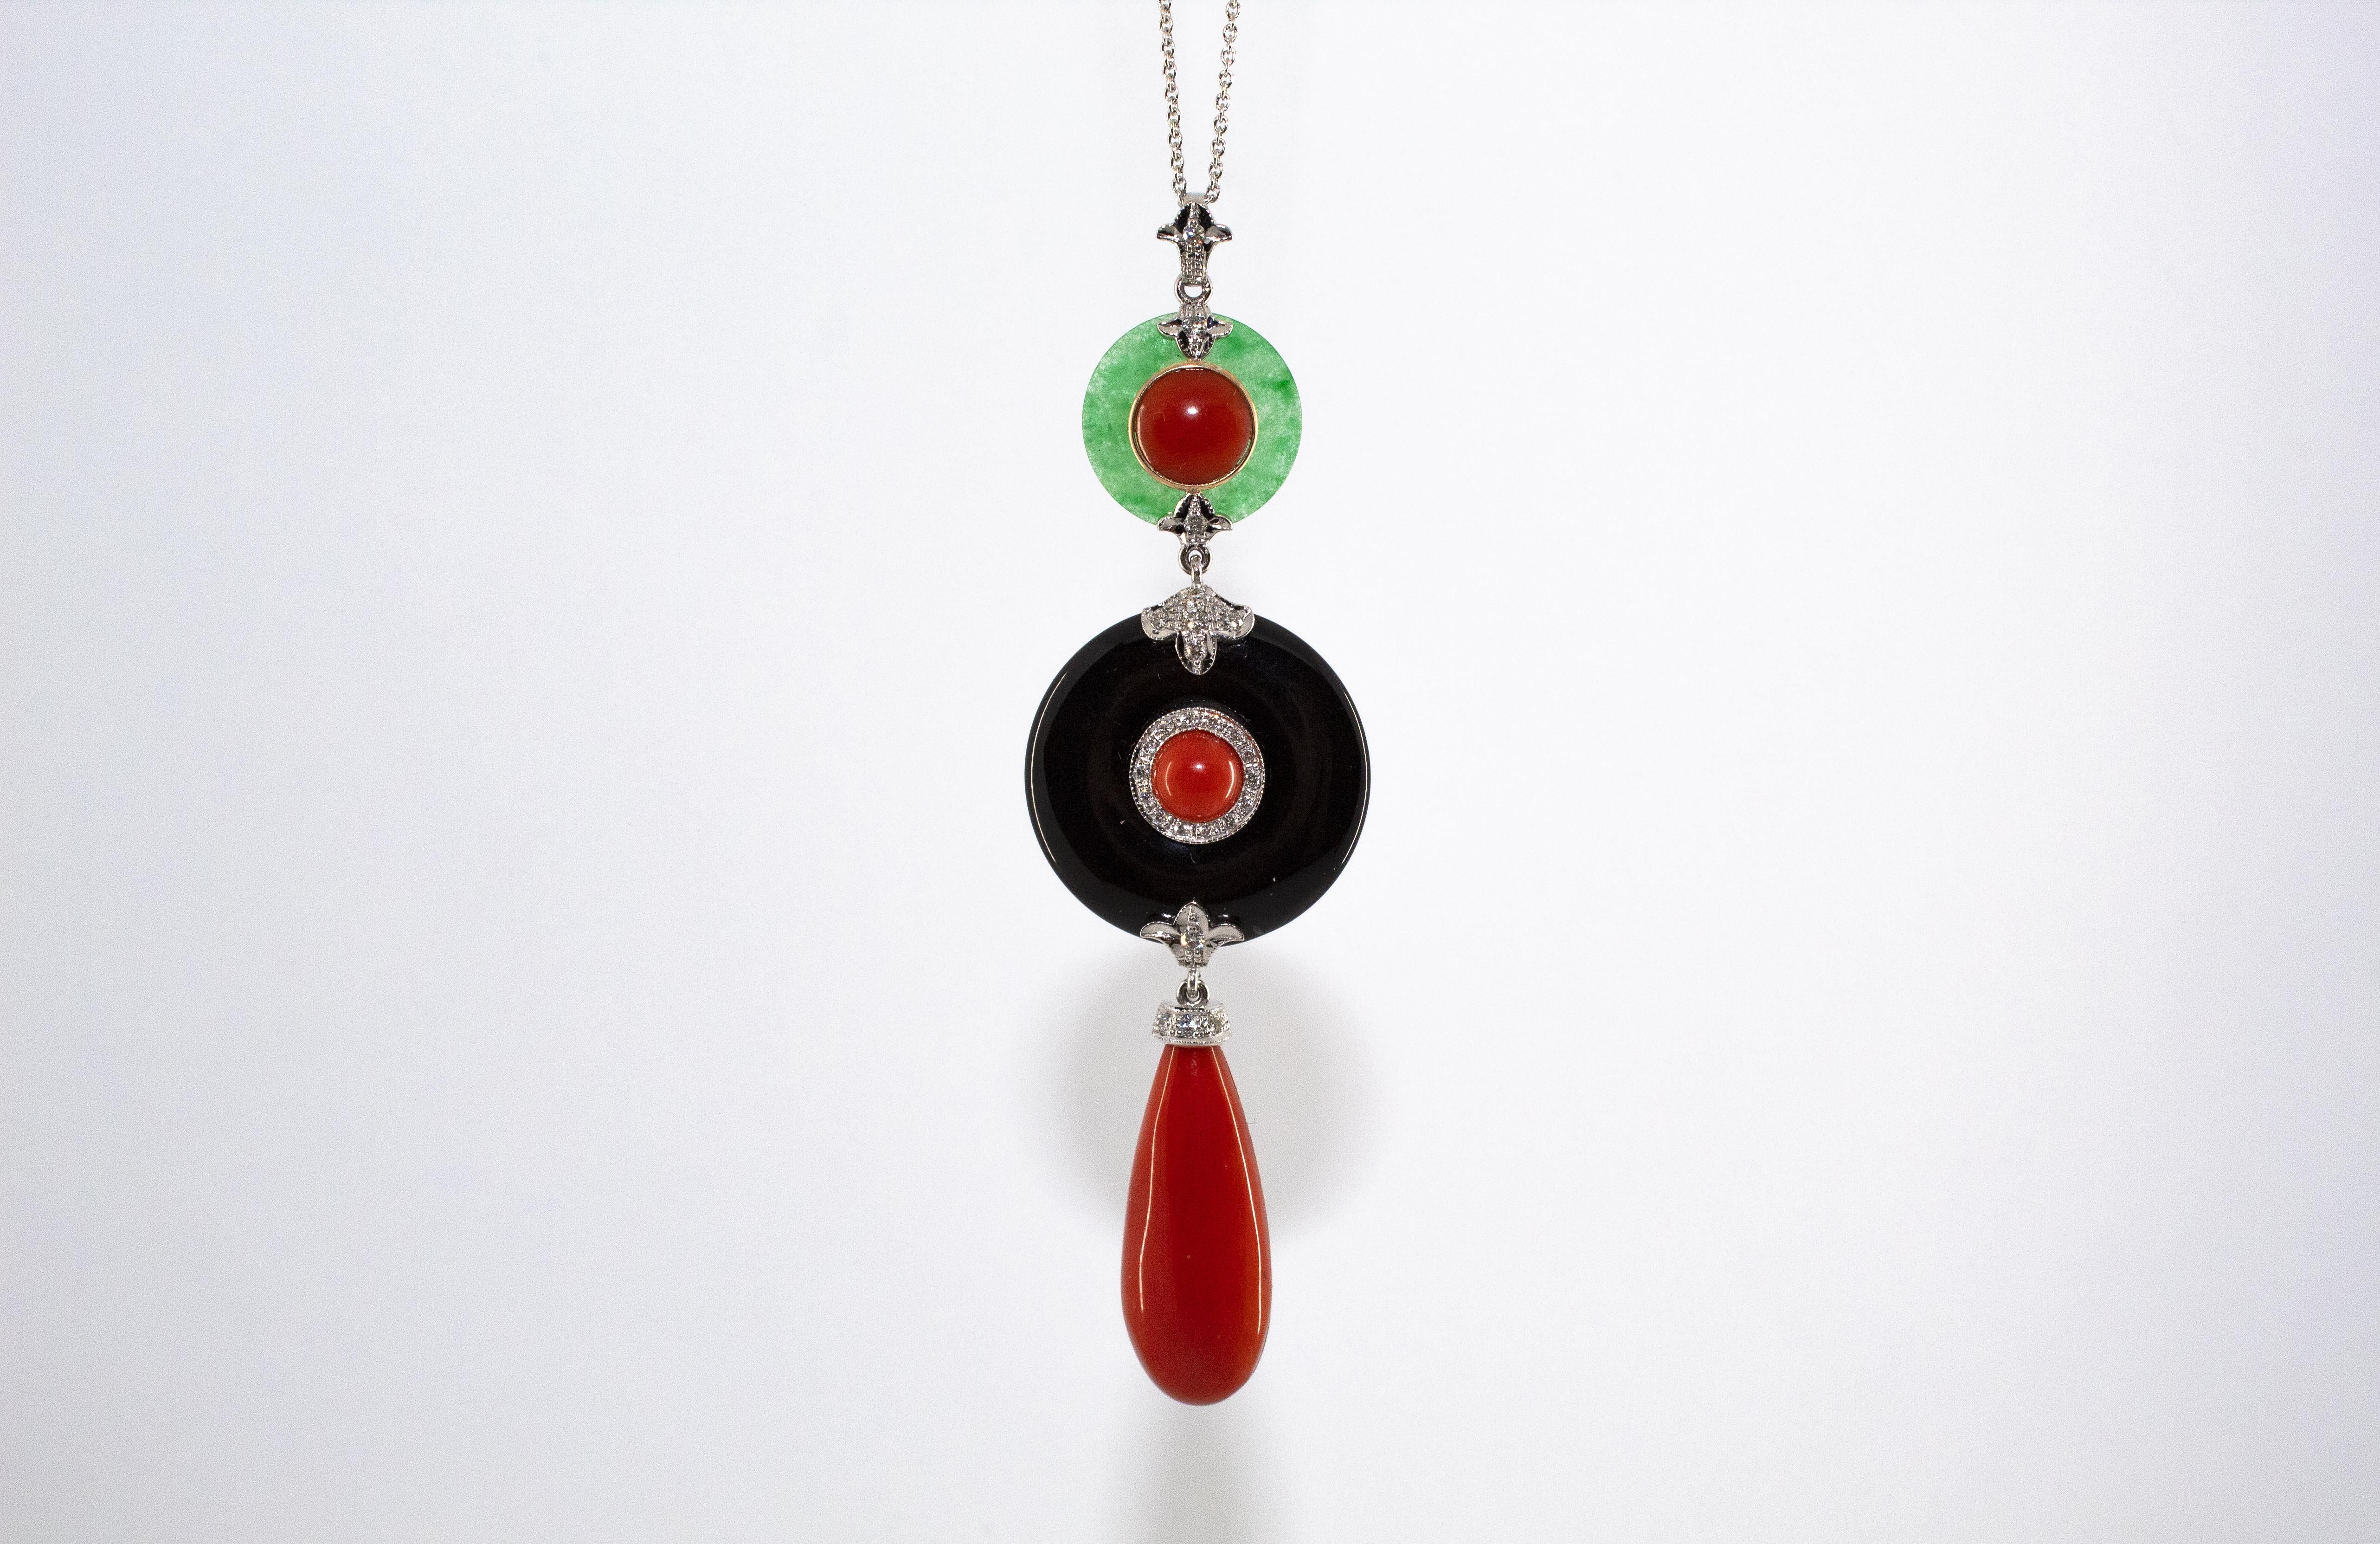 This Necklace is made of 14K White and Yellow Gold.
This Necklace has 0.35 Carats of White Diamonds.
This Necklace has also Jadeite, Onyx and Mediterranean (Sardinia, Italy) Red Coral.
The Length of the Necklace is 45cm.
We're a workshop so every